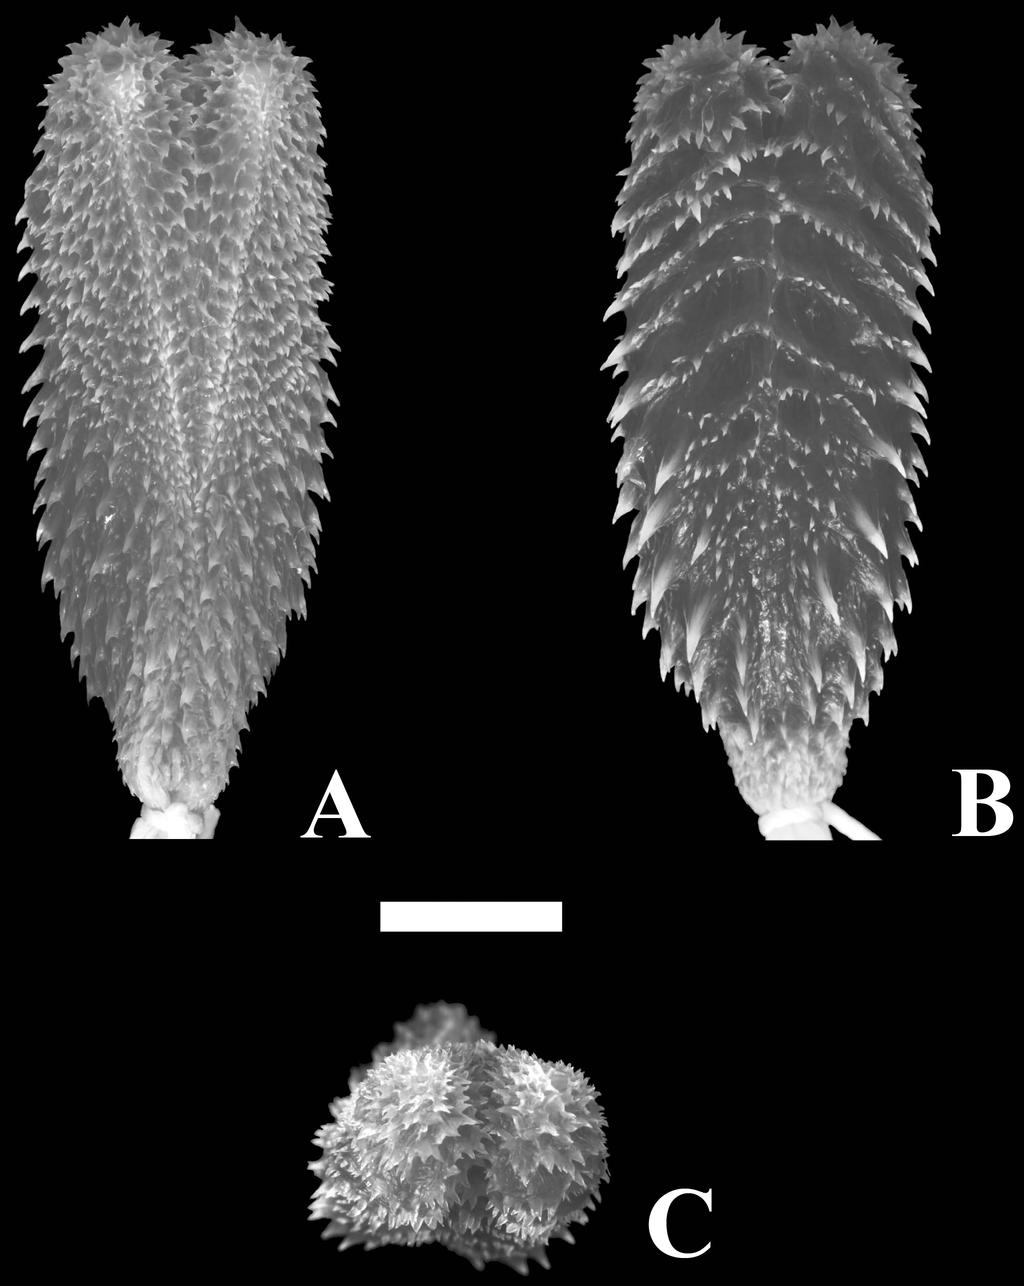 FIGURE 3. Hemipenis of the holotype of Philodryas amaru (FHGO 4749) in sulcate (A), asulcate (B), and top (C) views. Scale length = 5 mm. Hemipenis of the holotype. The hemipenis is fully everted and maximally expanded (Fig.